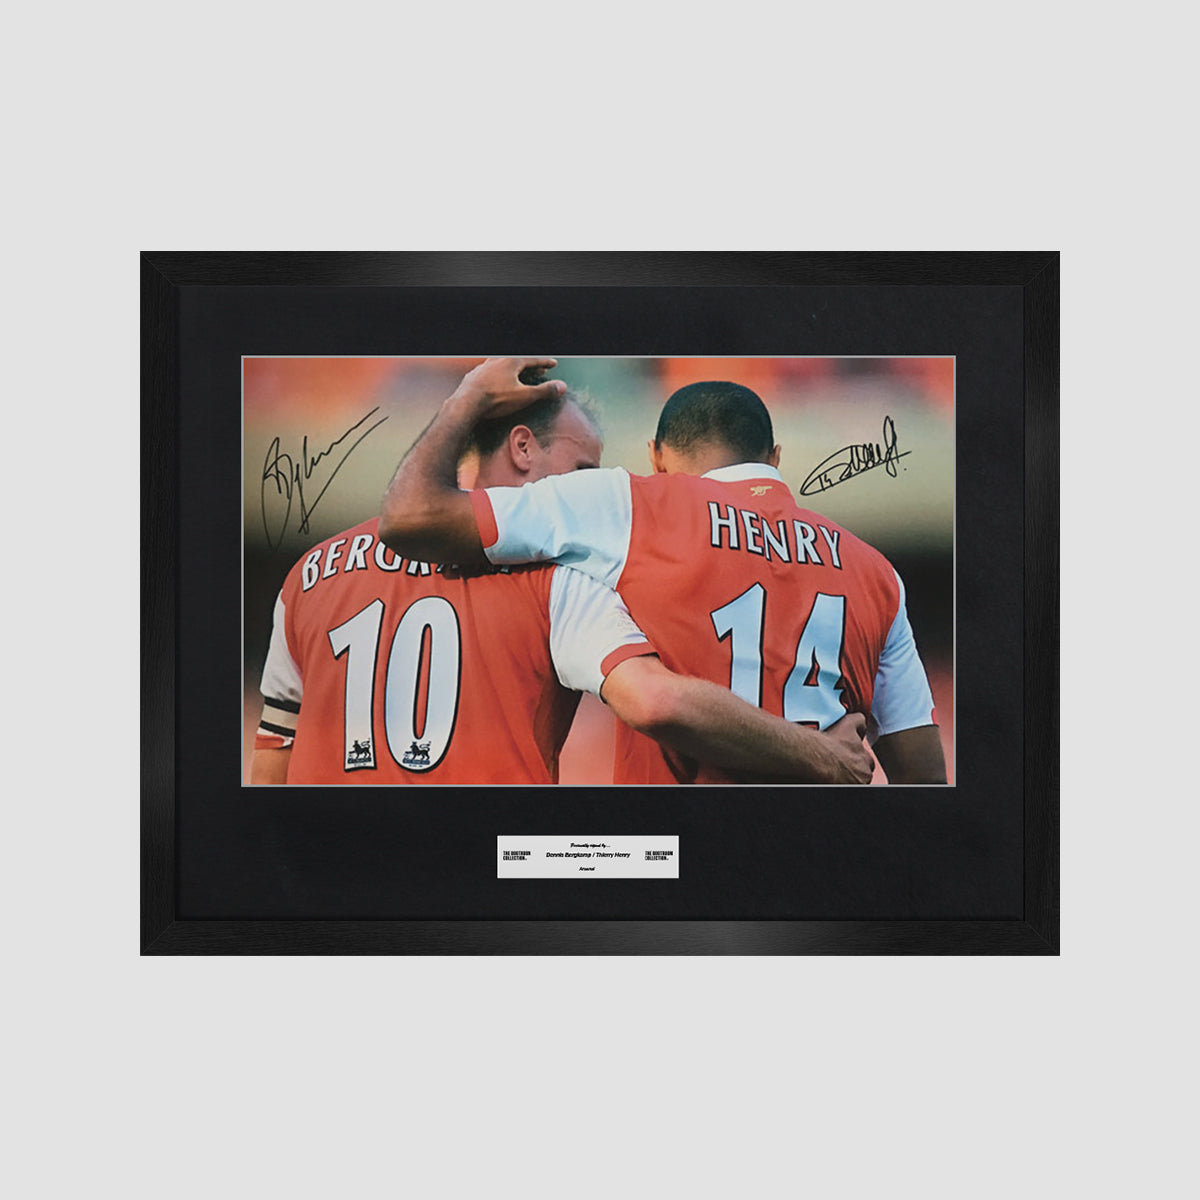 Thierry Henry & Dennis Bergkamp Dual Signed Arsenal Photo (Framed)